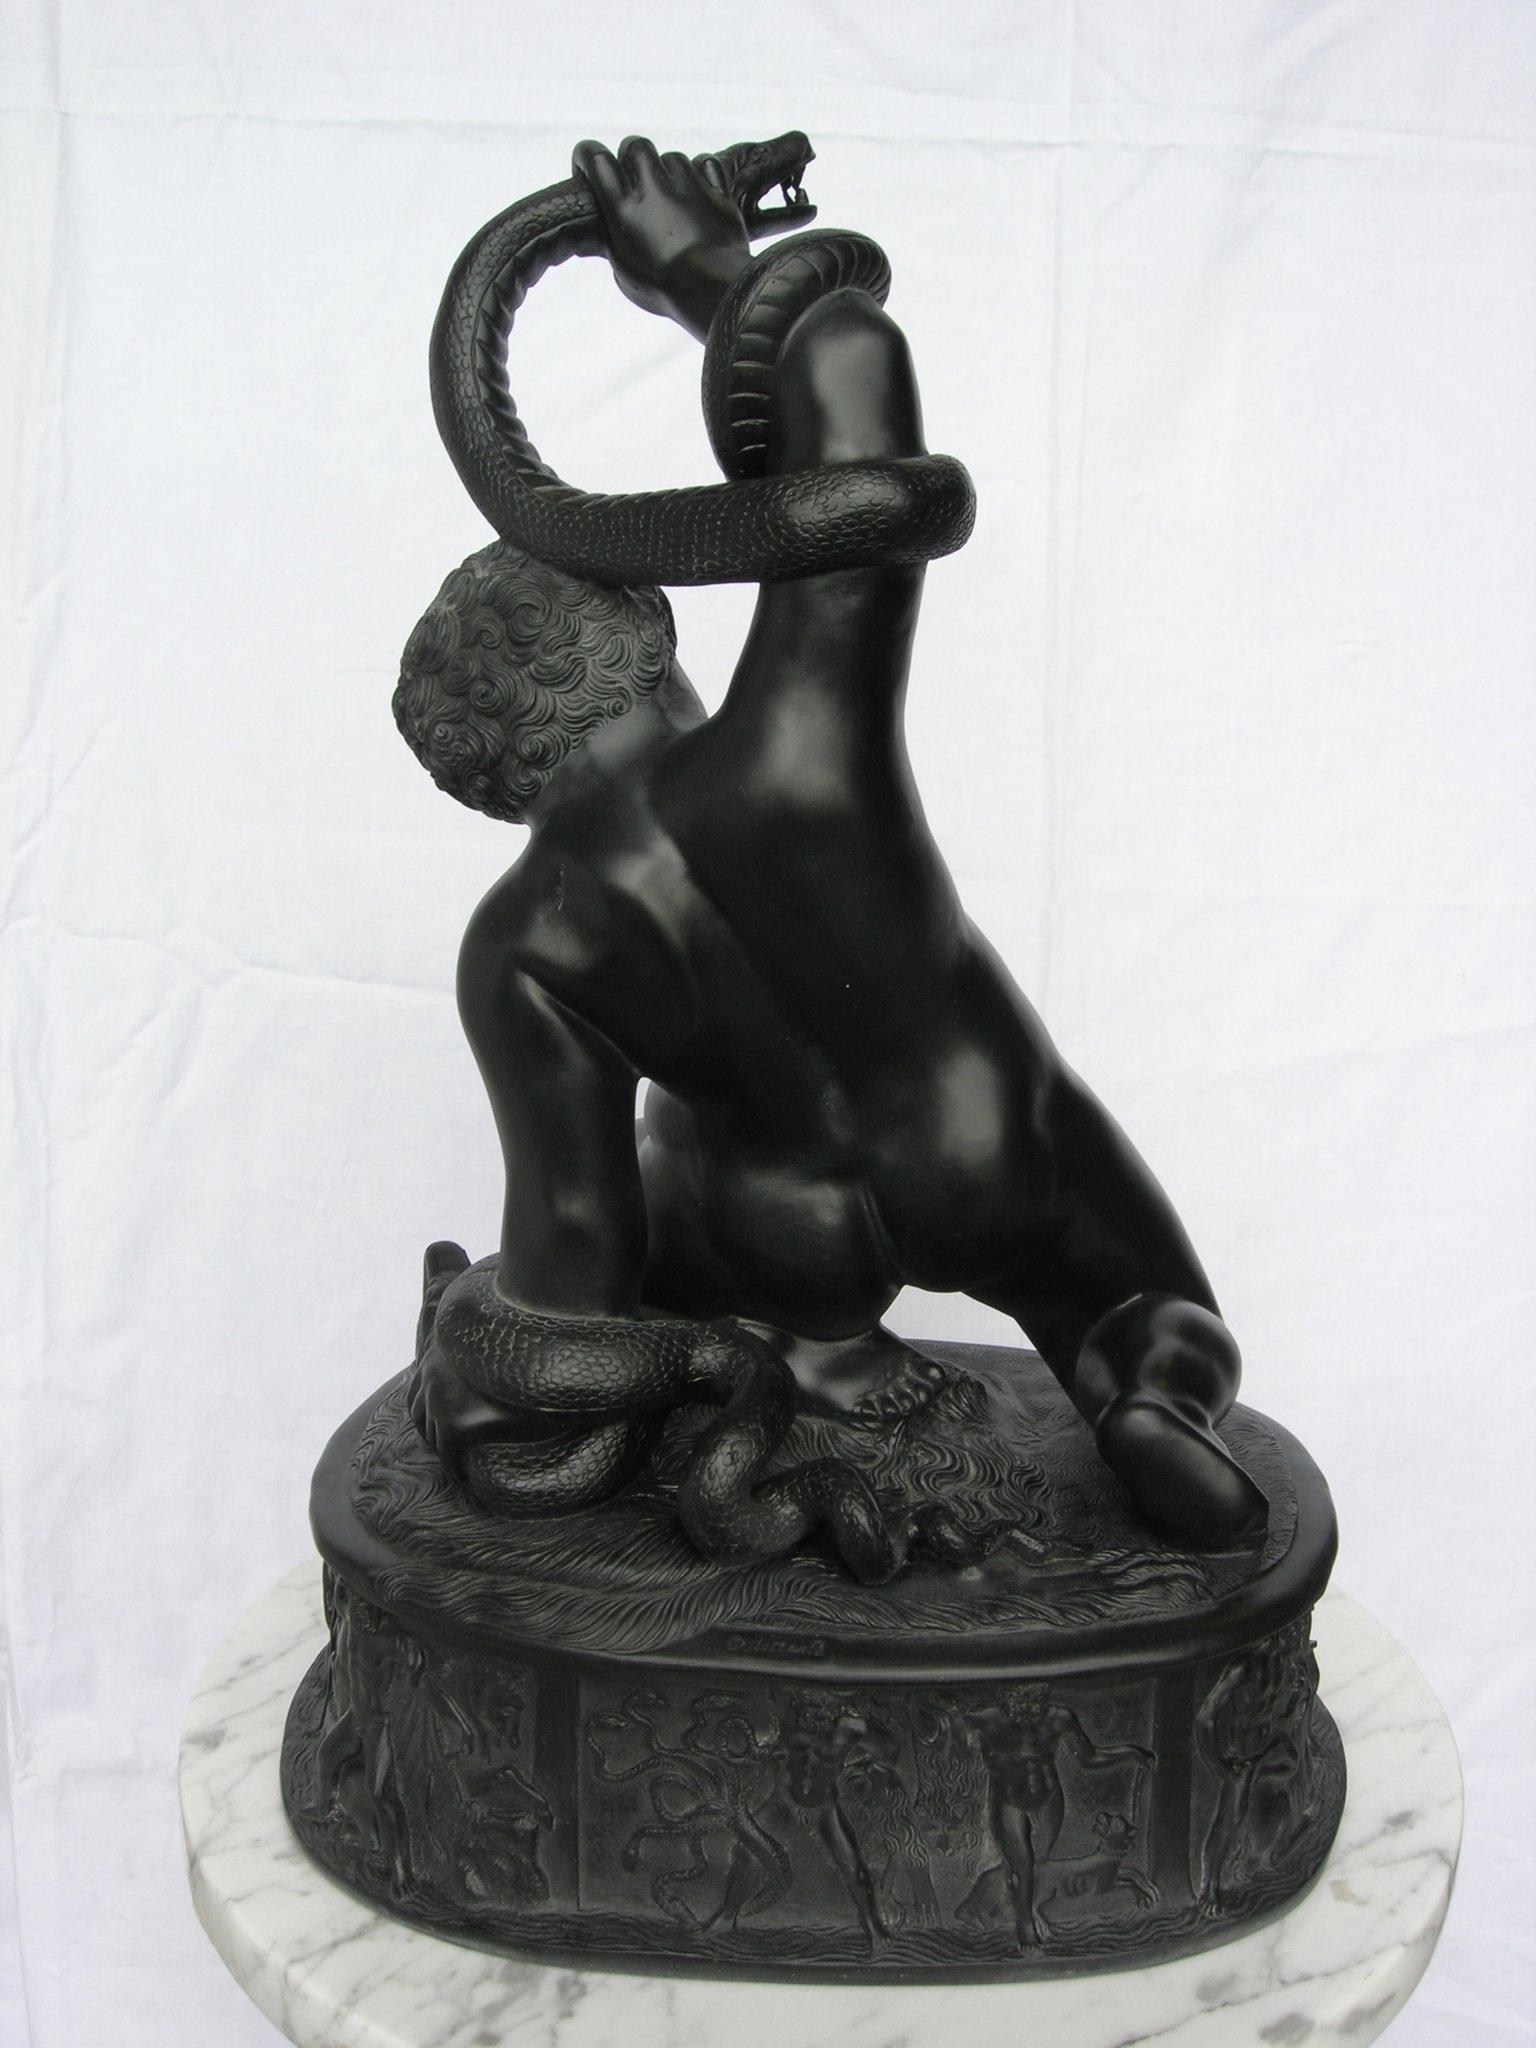 The Young Hercules, Basalt Black Marble Sculpture, 20th Century For Sale 2